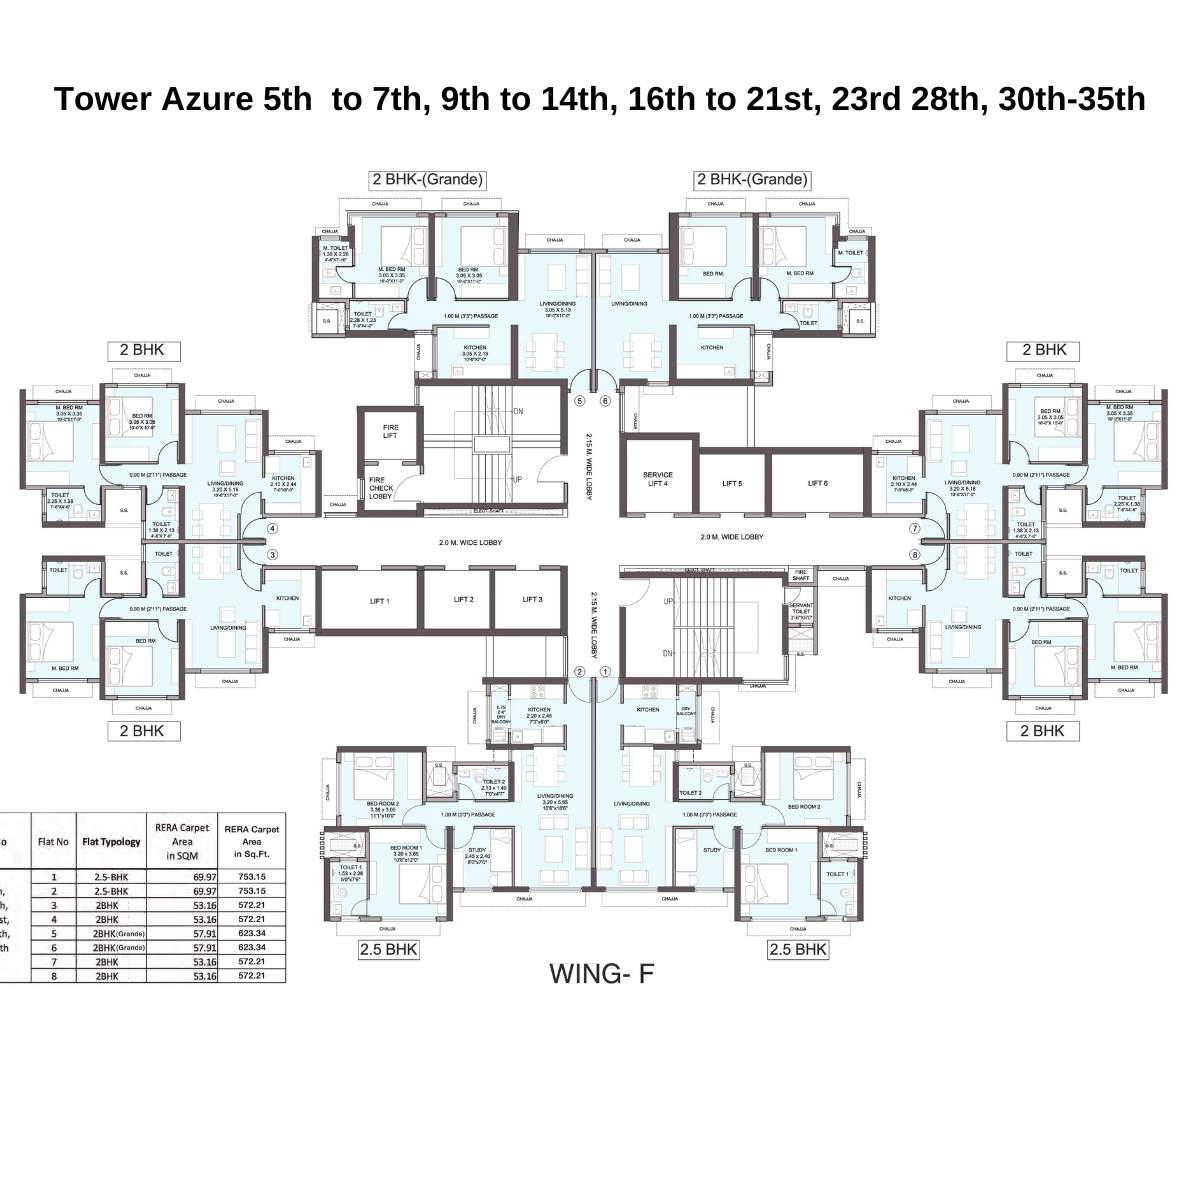 Wadhwa-Atmosphere-Floor-Plan-Tower-Azure-5h-to-7th,9th-to-14th,16th-to-21st,23rd-28th,30th-35th